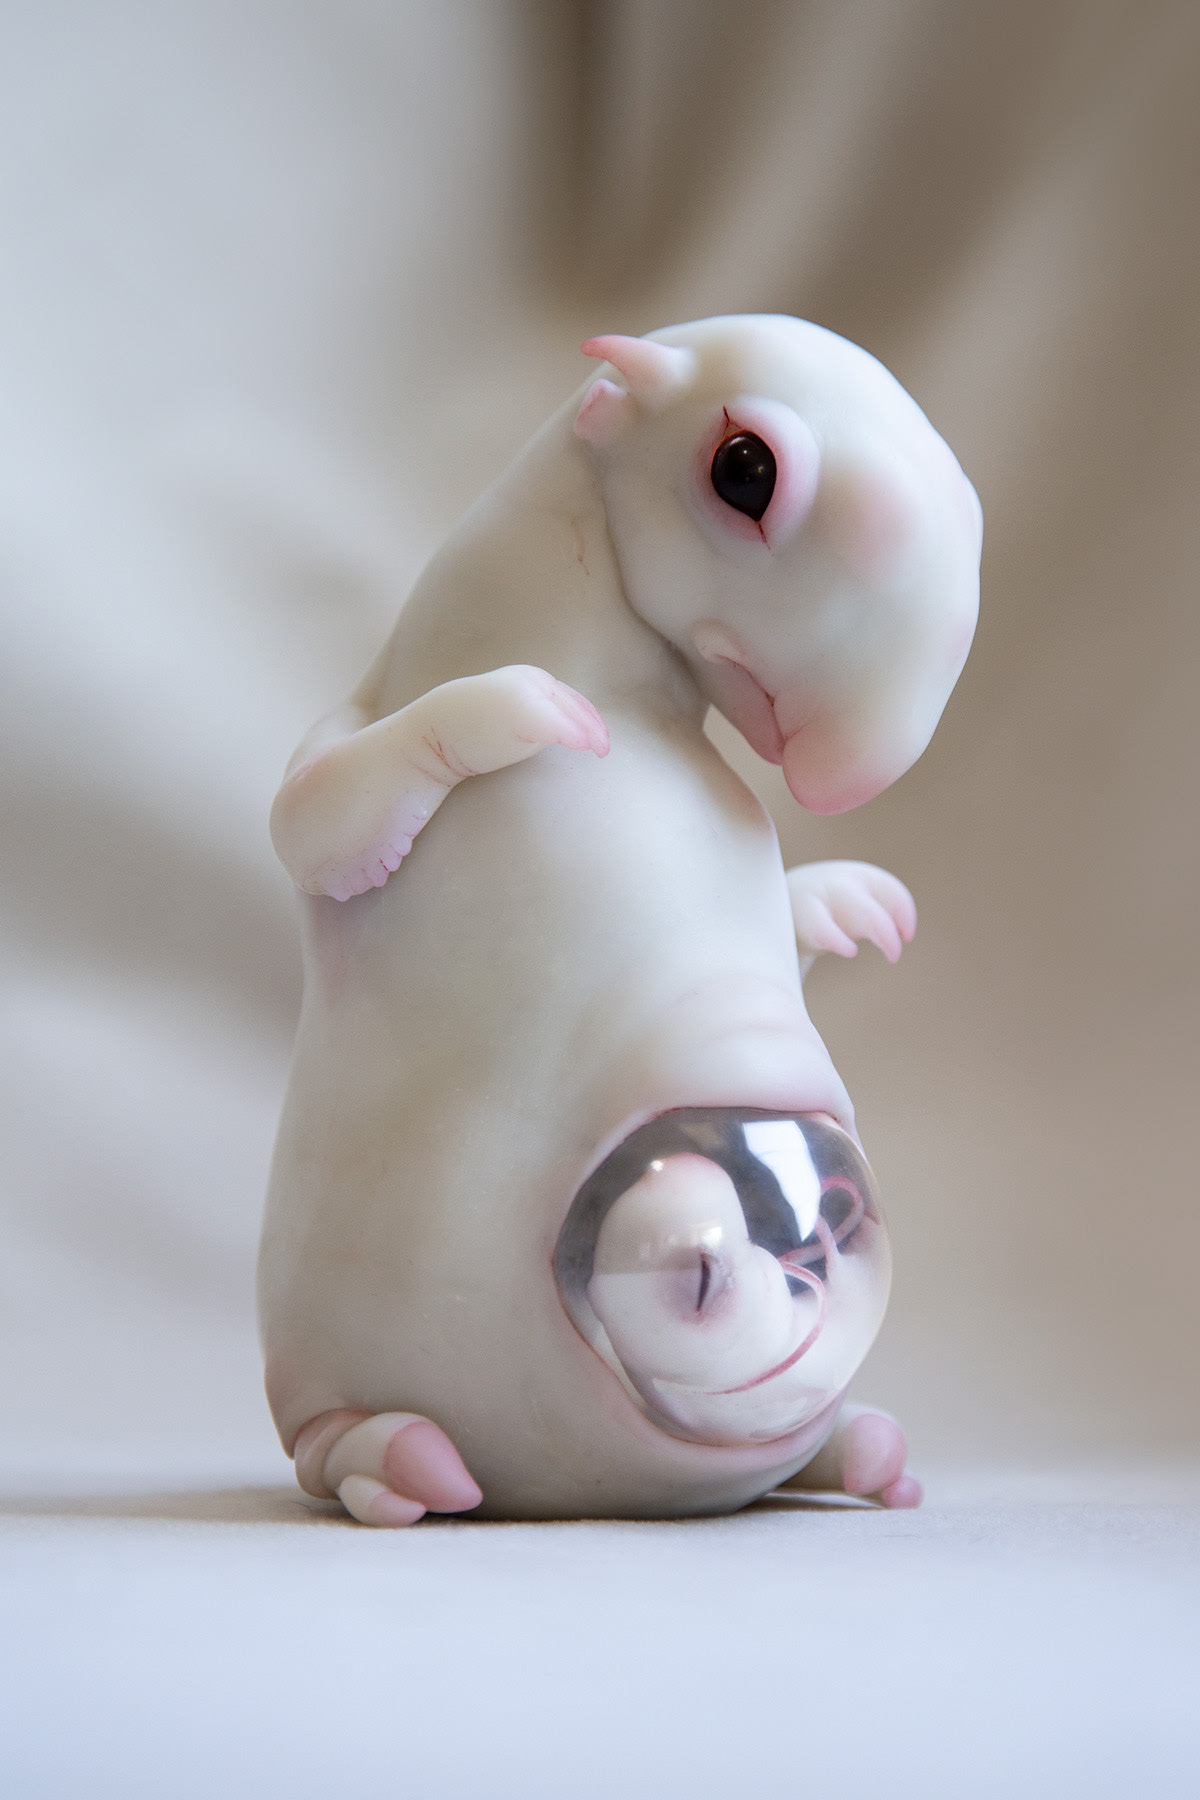 My sculpture of pregnant Alien Tapir monny with small embrio